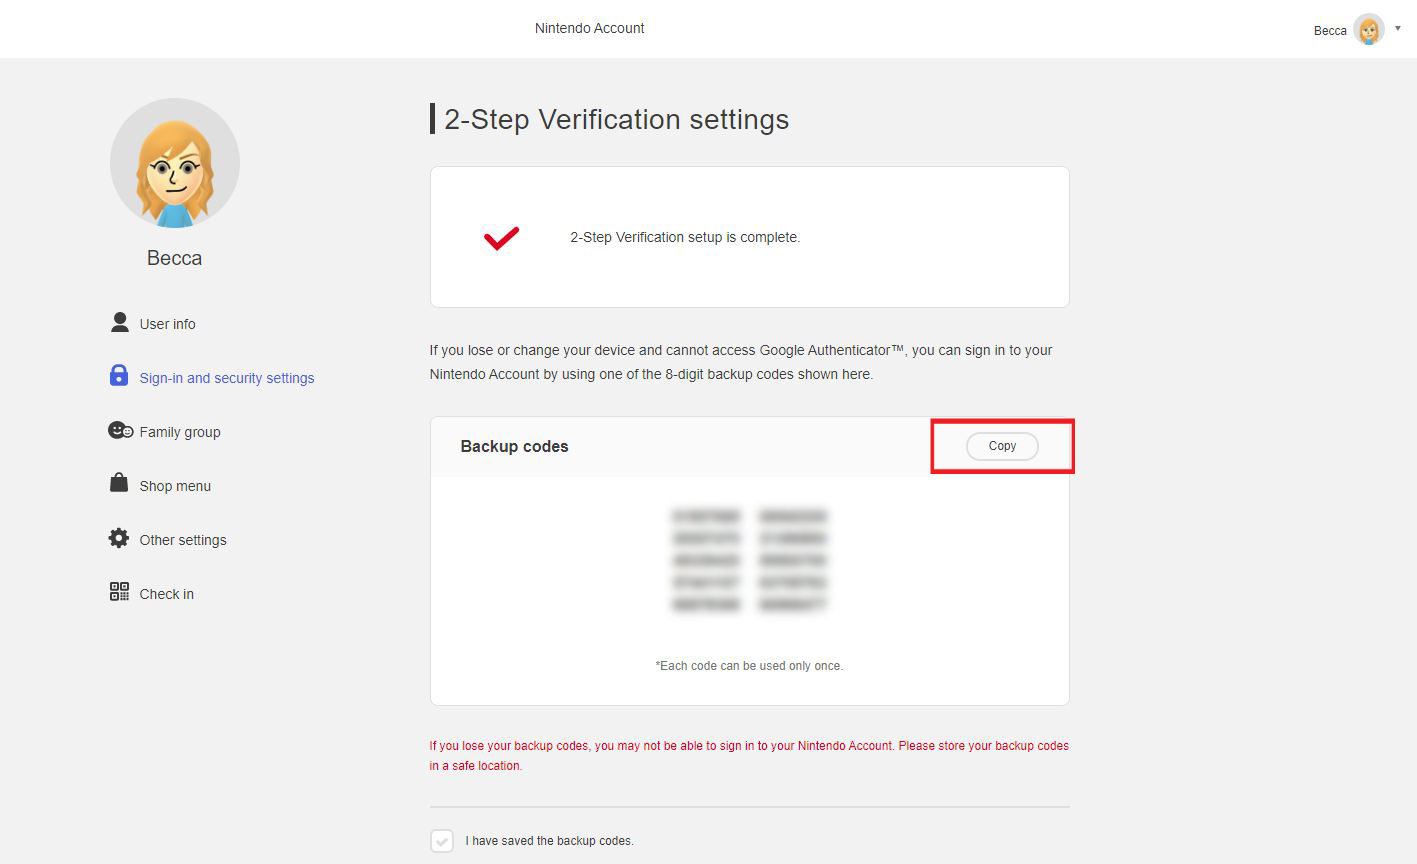 https://www.imore.com/sites/imore.com/files/styles/large/public/field/image/2020/04/how-to-two-factor-authentication-nintendo-switch-016.jpg?itok=gPfqJYta